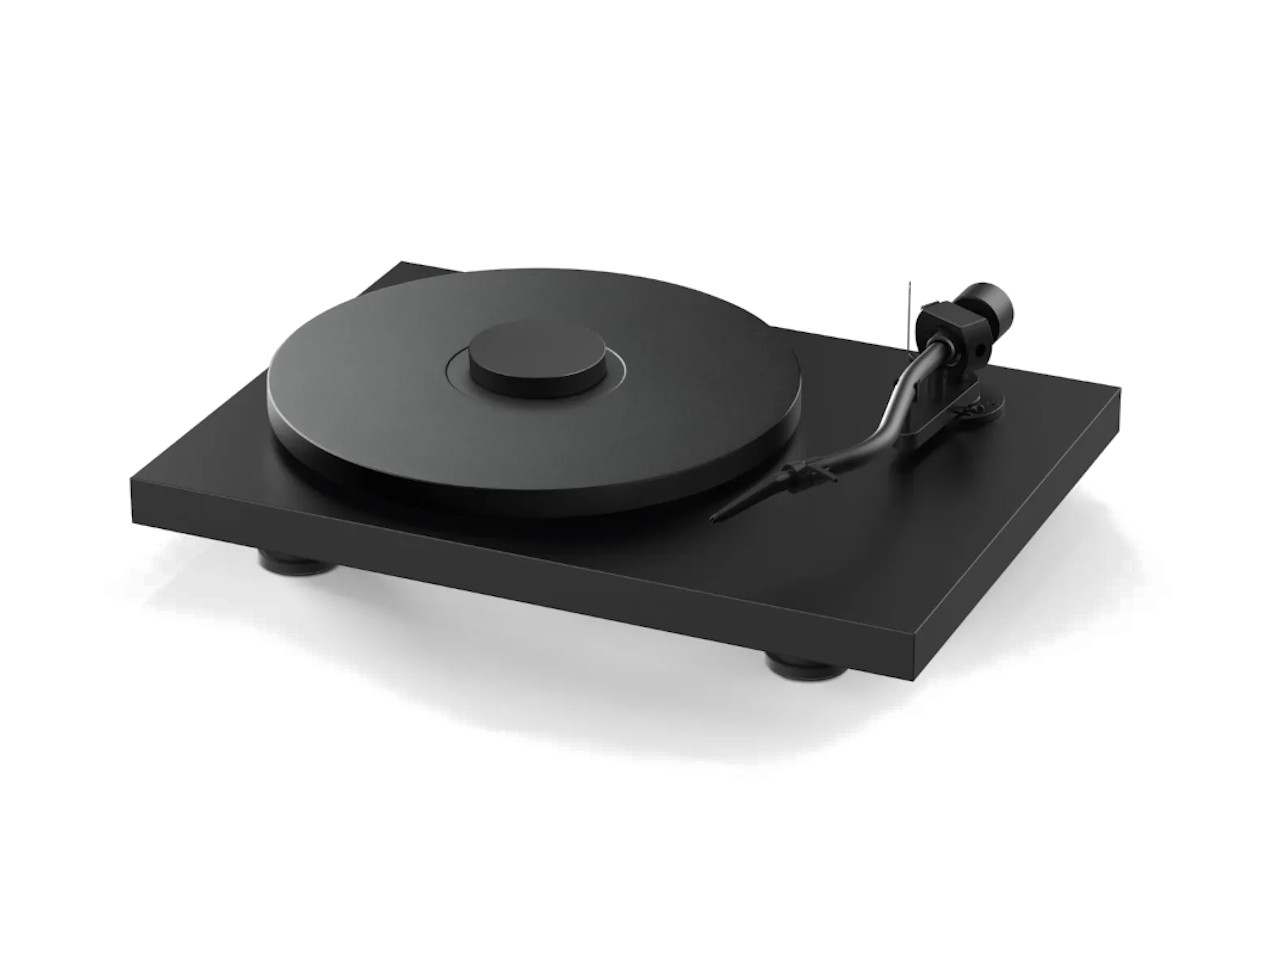 Pro-Ject Debut PRO S